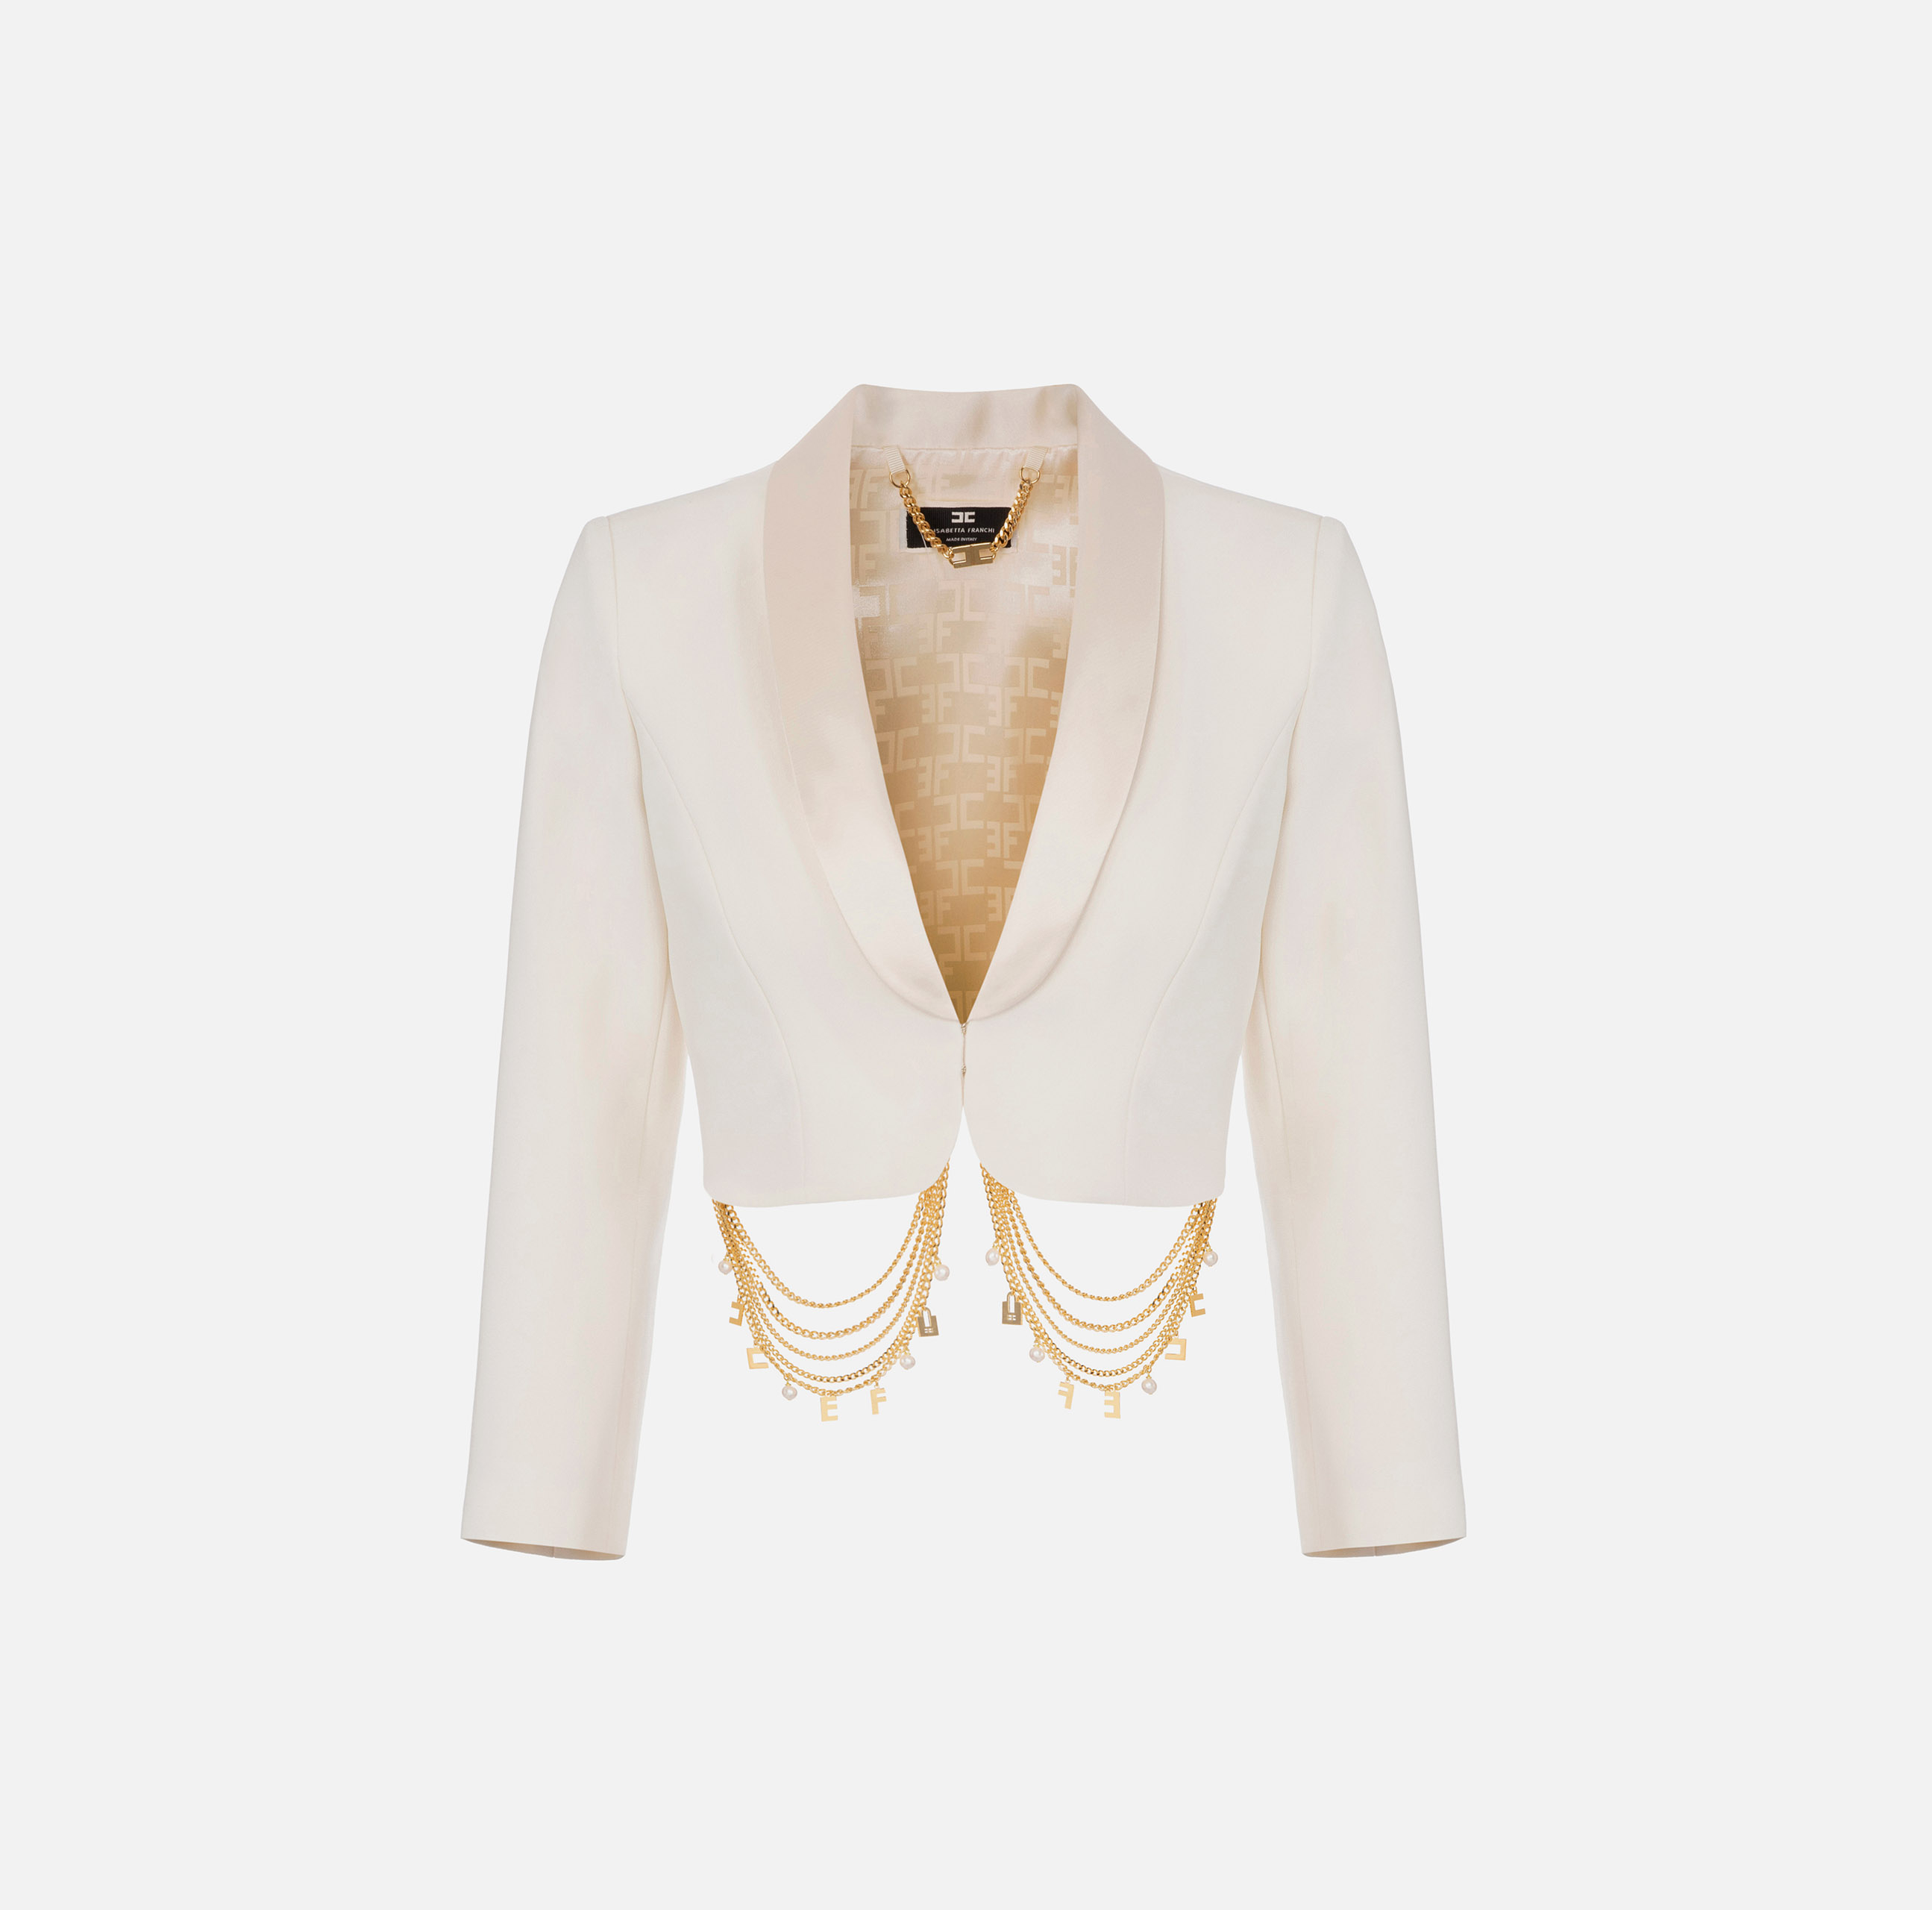 Short jacket in crêpe fabric with chains - Elisabetta Franchi